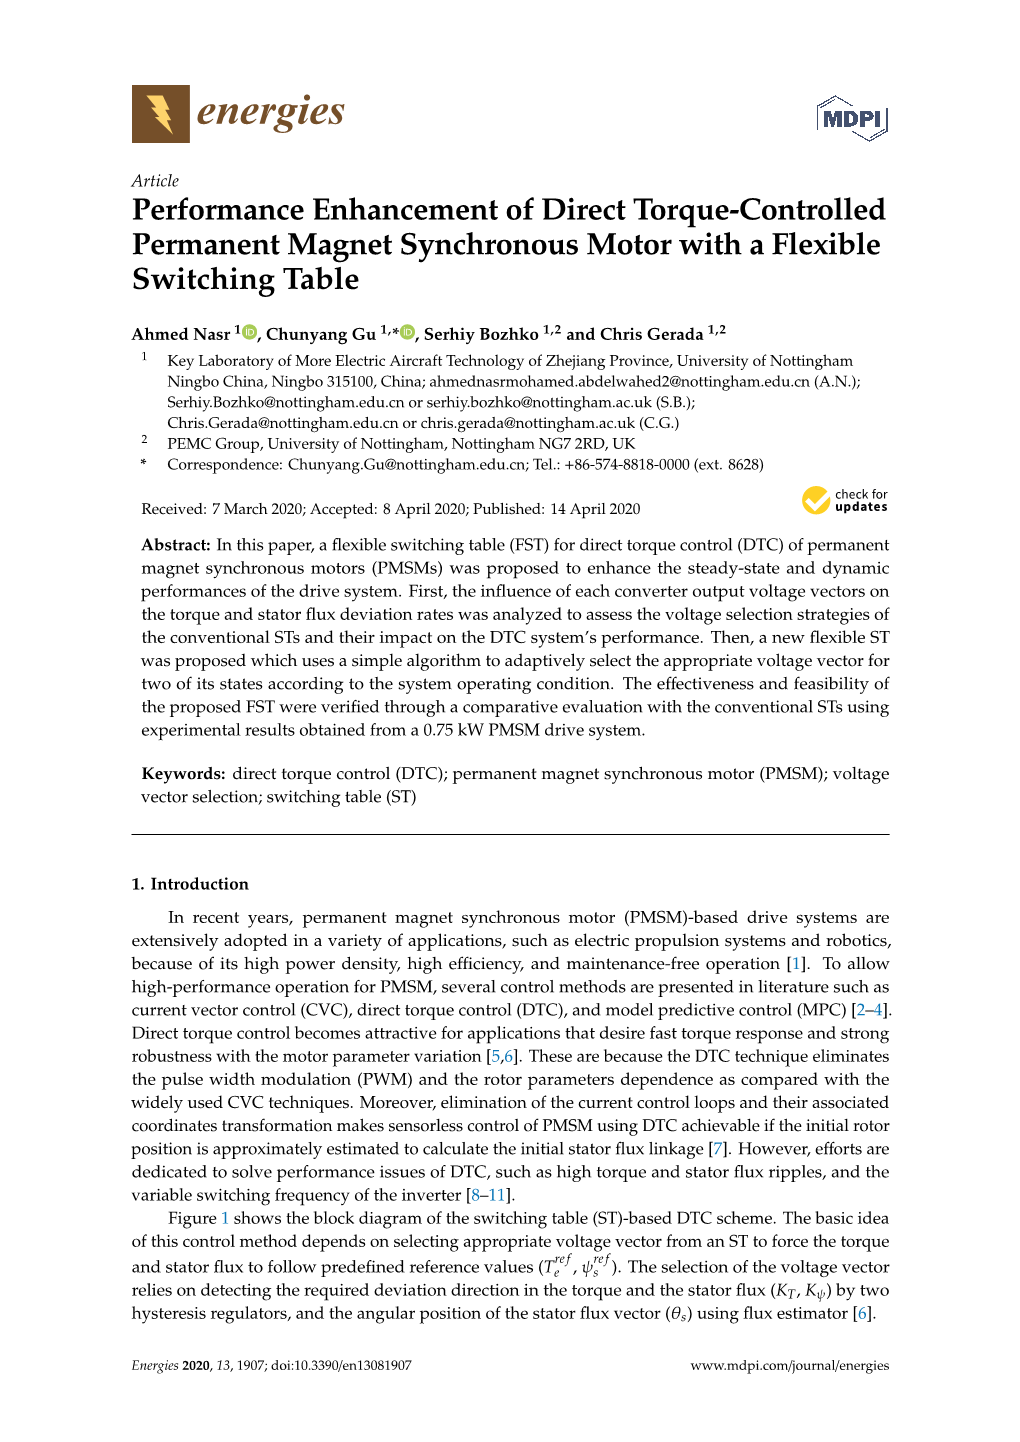 Performance Enhancement of Direct Torque-Controlled Permanent Magnet Synchronous Motor with a Flexible Switching Table